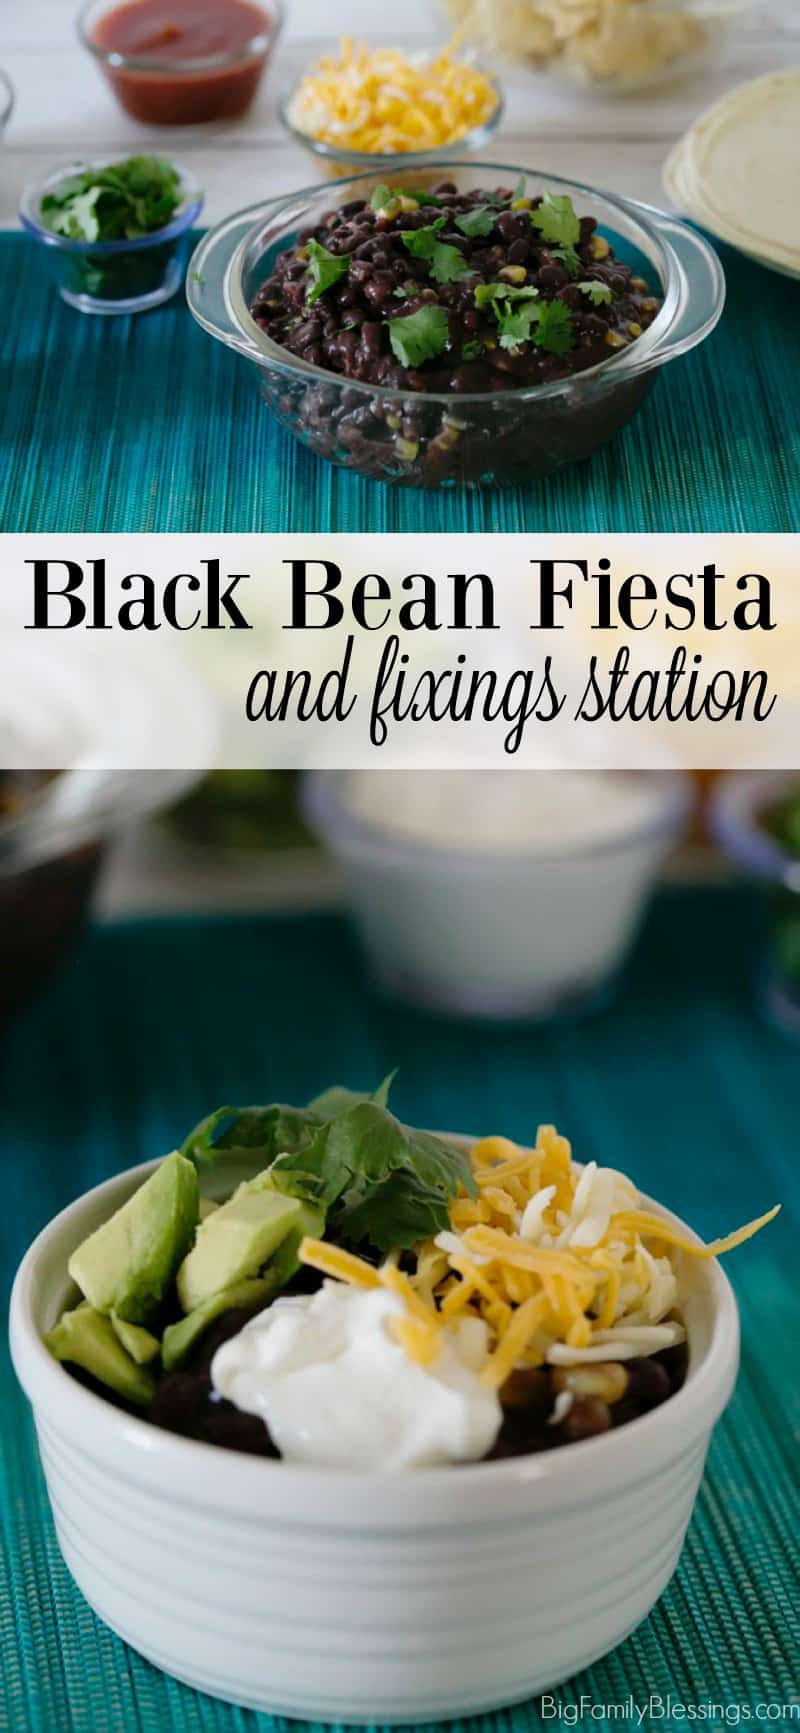 Black Bean Fiesta and Fixings Station - Perfect for stretching your grocery budget with a meatless meal, or the perfect companion to taco night.